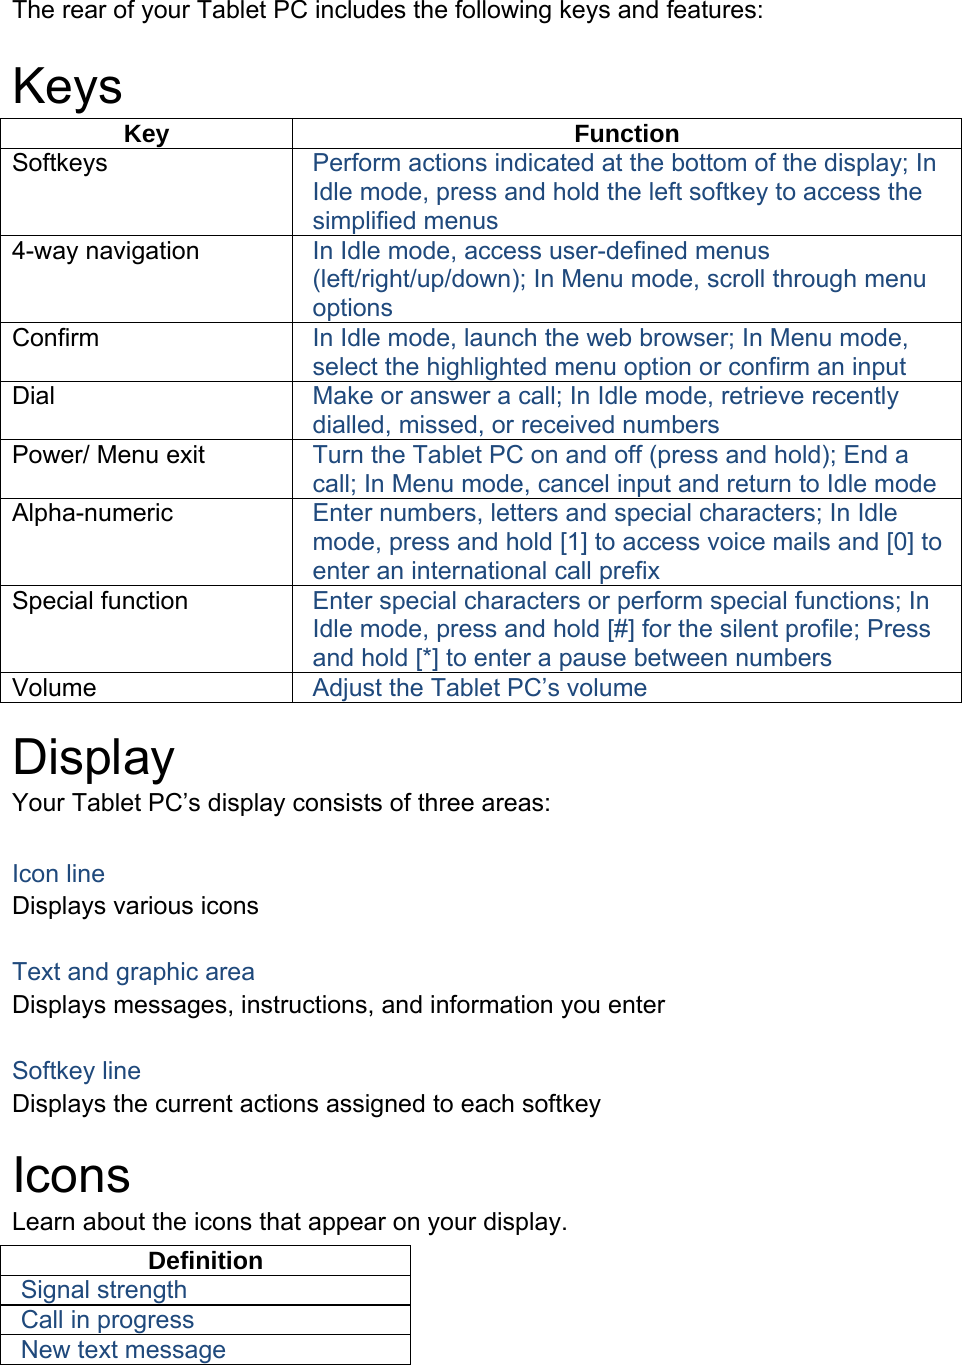 The rear of your Tablet PC includes the following keys and features:  Keys Key Function Softkeys  Perform actions indicated at the bottom of the display; In Idle mode, press and hold the left softkey to access the simplified menus 4-way navigation  In Idle mode, access user-defined menus (left/right/up/down); In Menu mode, scroll through menu options Confirm  In Idle mode, launch the web browser; In Menu mode, select the highlighted menu option or confirm an input Dial  Make or answer a call; In Idle mode, retrieve recently dialled, missed, or received numbers Power/ Menu exit  Turn the Tablet PC on and off (press and hold); End a call; In Menu mode, cancel input and return to Idle mode Alpha-numeric  Enter numbers, letters and special characters; In Idle mode, press and hold [1] to access voice mails and [0] to enter an international call prefix Special function  Enter special characters or perform special functions; In Idle mode, press and hold [#] for the silent profile; Press and hold [*] to enter a pause between numbers Volume  Adjust the Tablet PC’s volume  Display Your Tablet PC’s display consists of three areas:  Icon line Displays various icons  Text and graphic area Displays messages, instructions, and information you enter  Softkey line Displays the current actions assigned to each softkey  Icons Learn about the icons that appear on your display. Definition Signal strength Call in progress New text message  